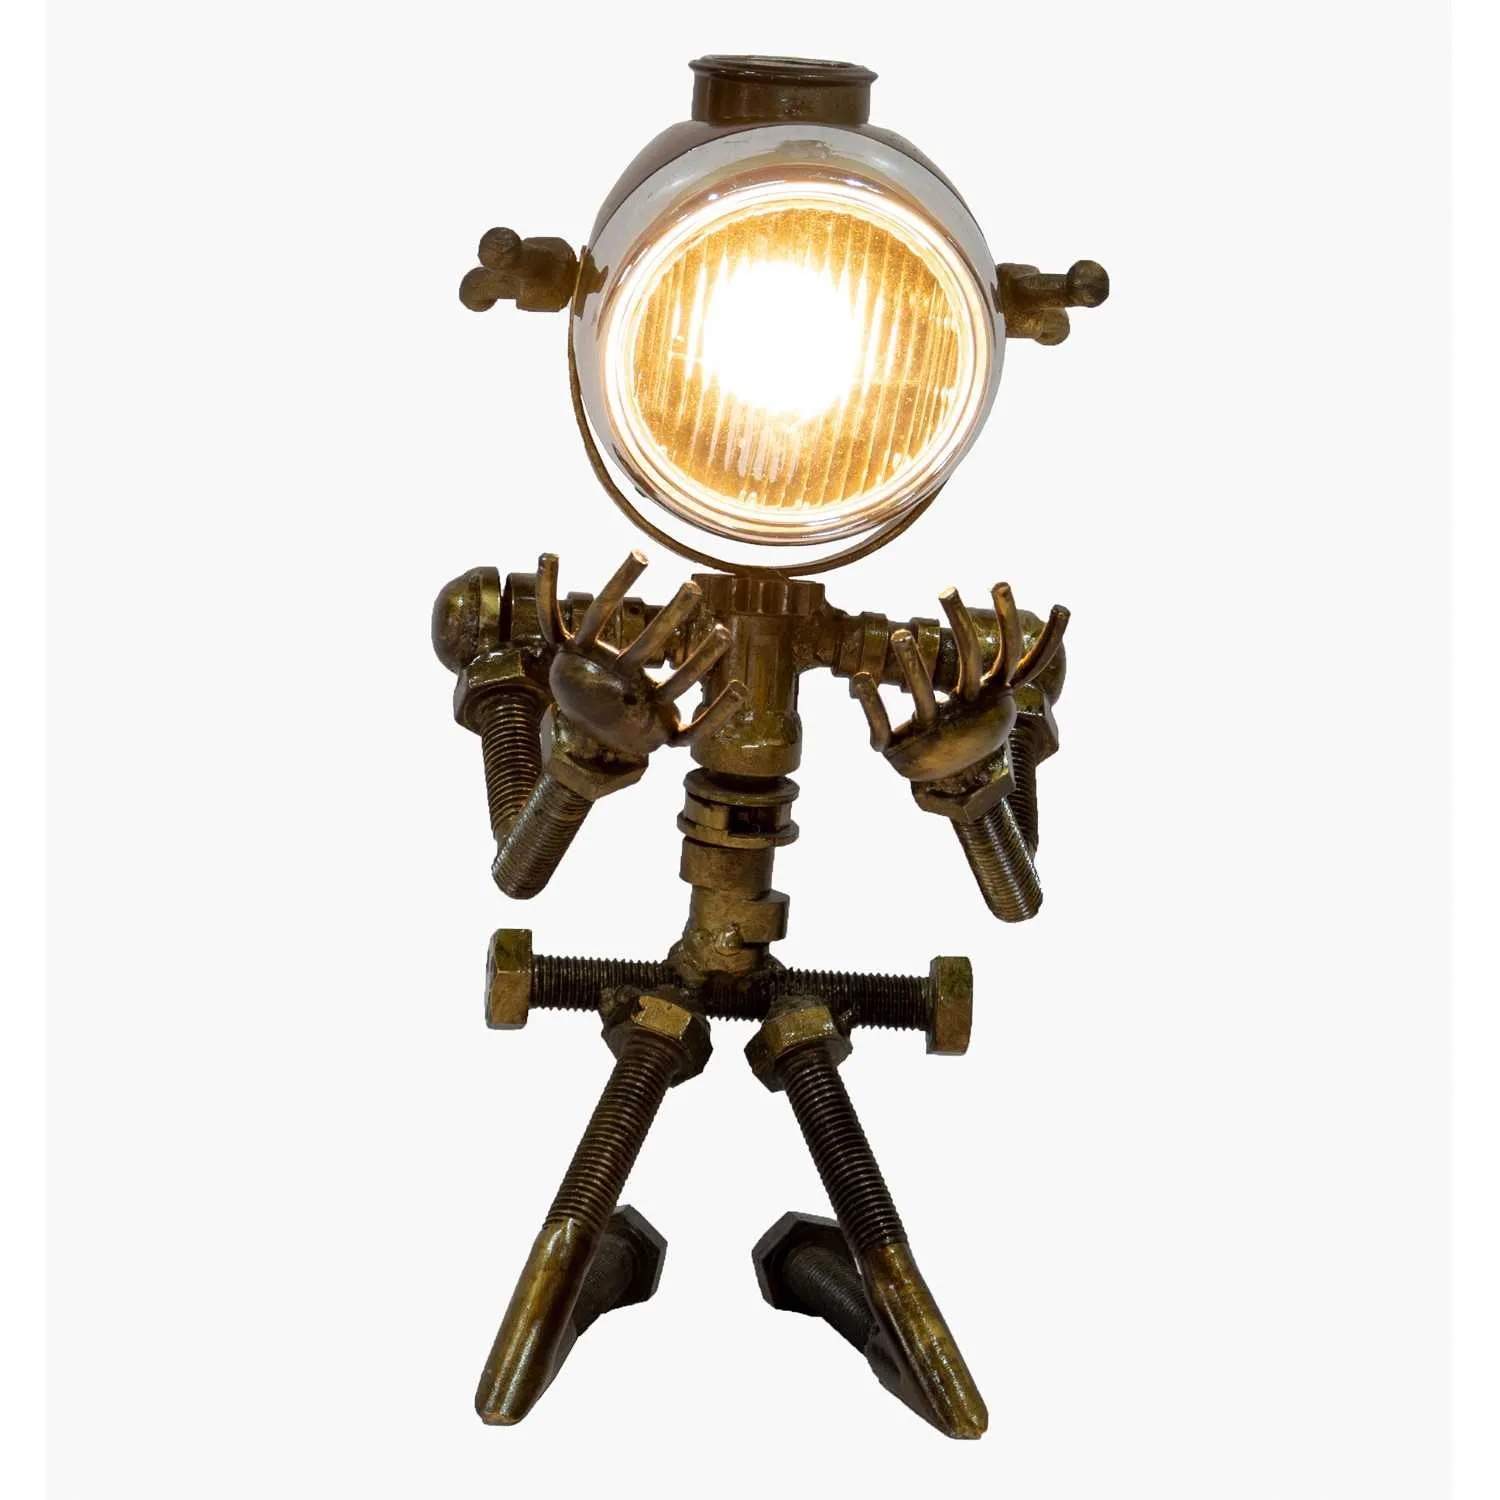 Upcycled Lighting And Furniture Reclaimed Parts Robot Table Lamp Down On His Knees